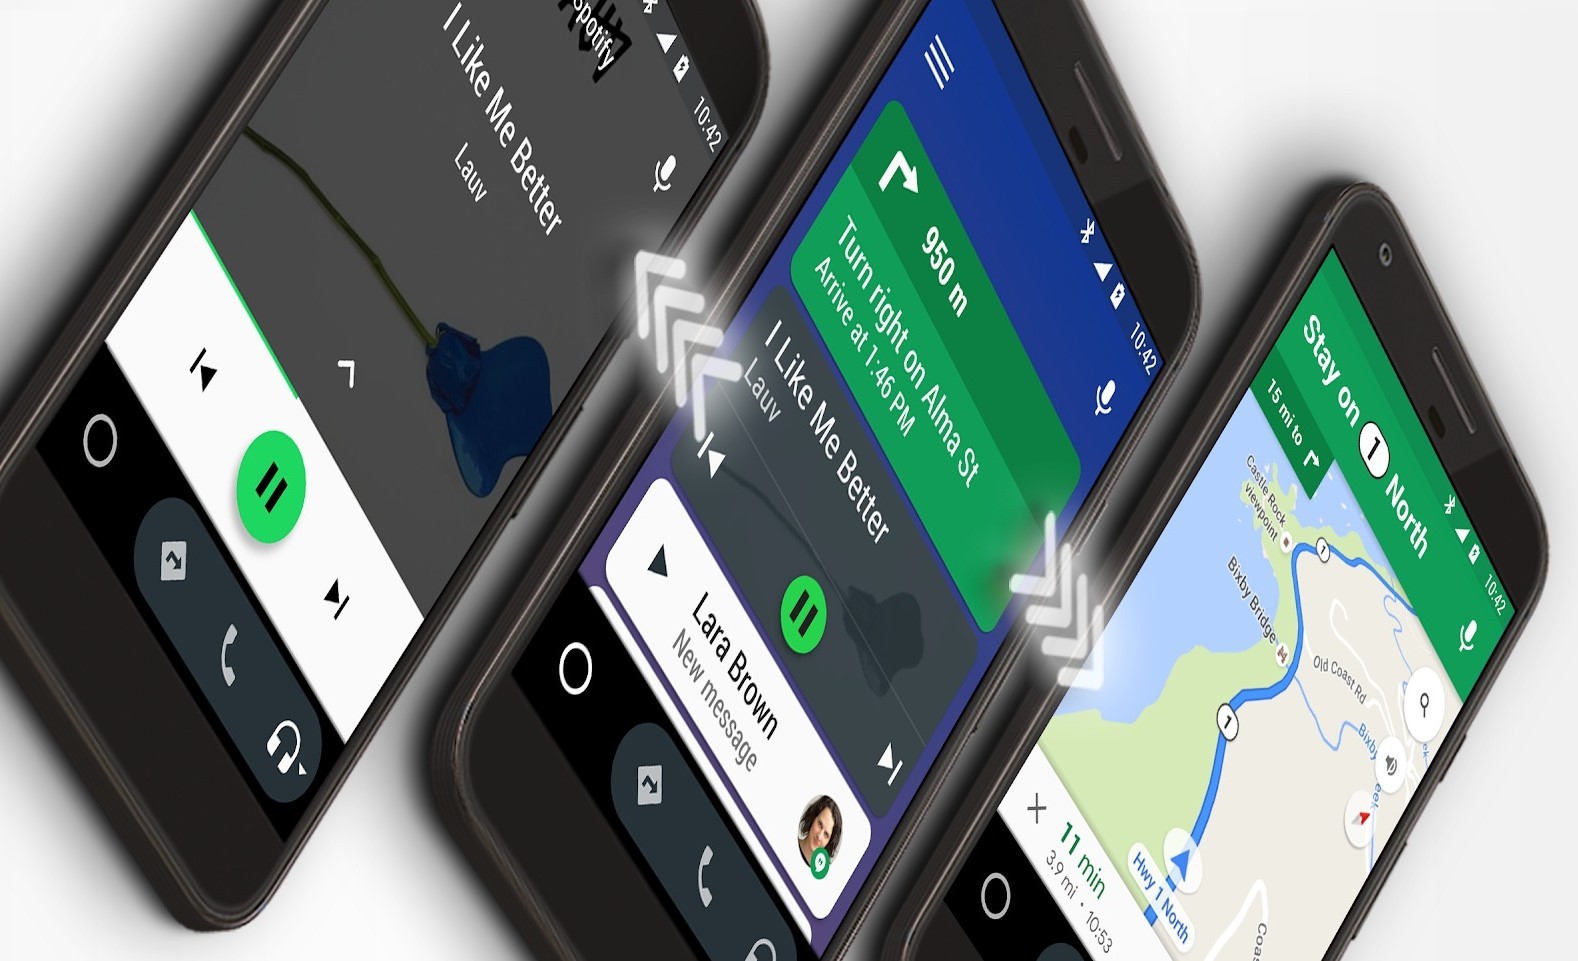 Digital Car looks to satiate your Android Auto desires, today - Android  Authority